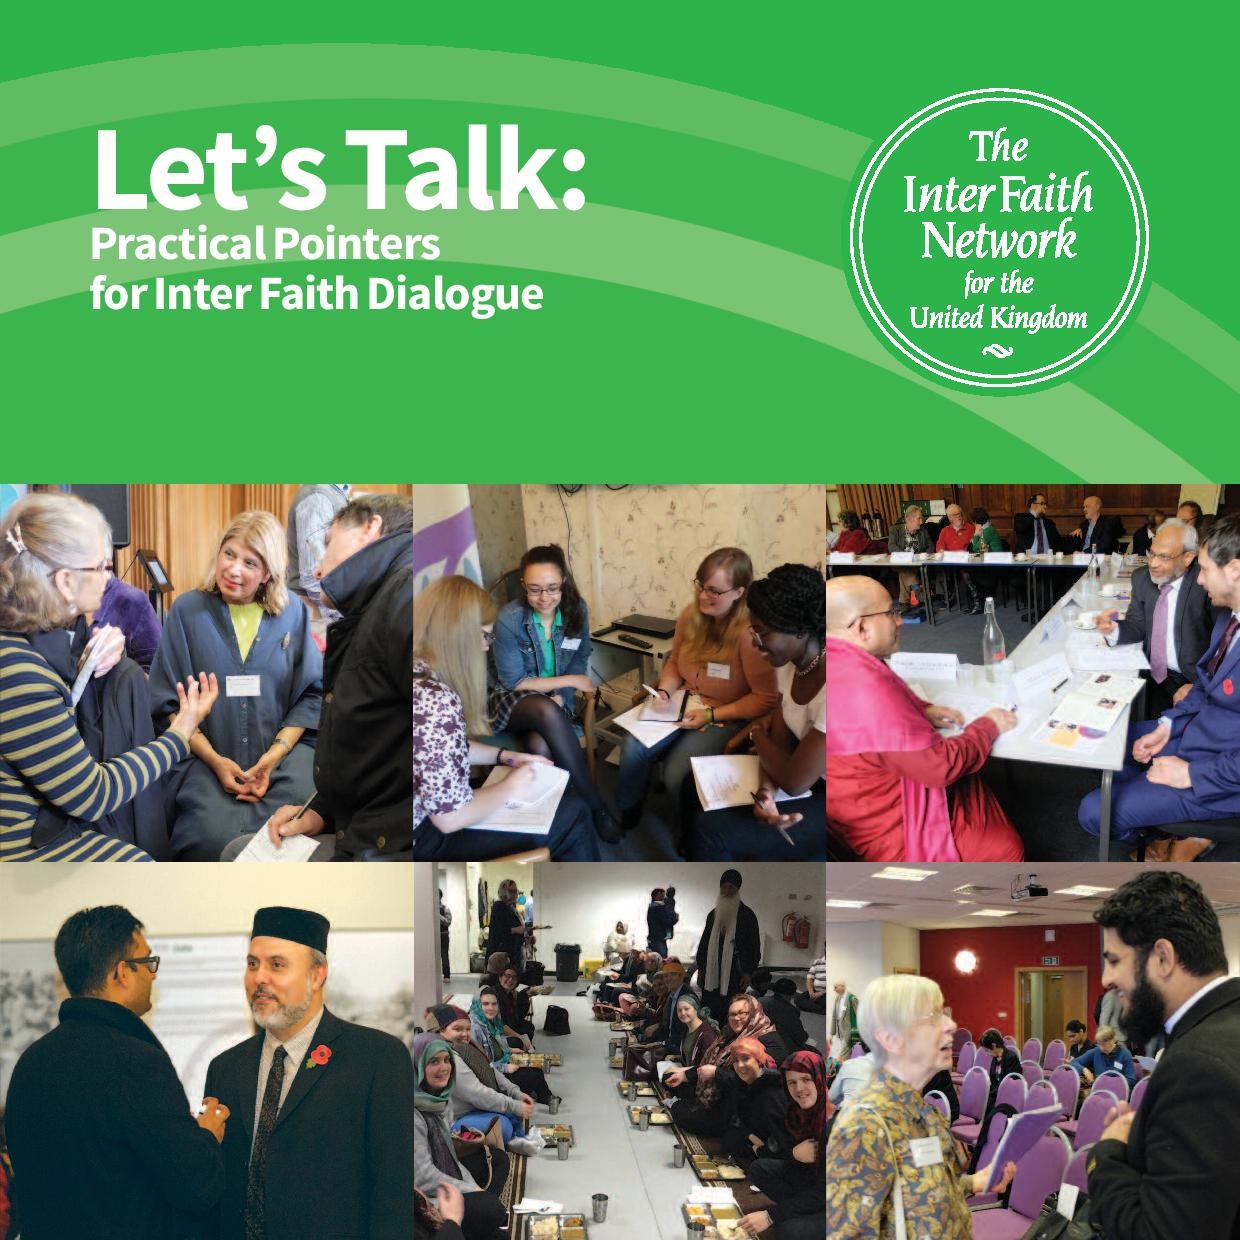 Let’s Talk 2017: Practical Pointers for Inter Faith Dialogue